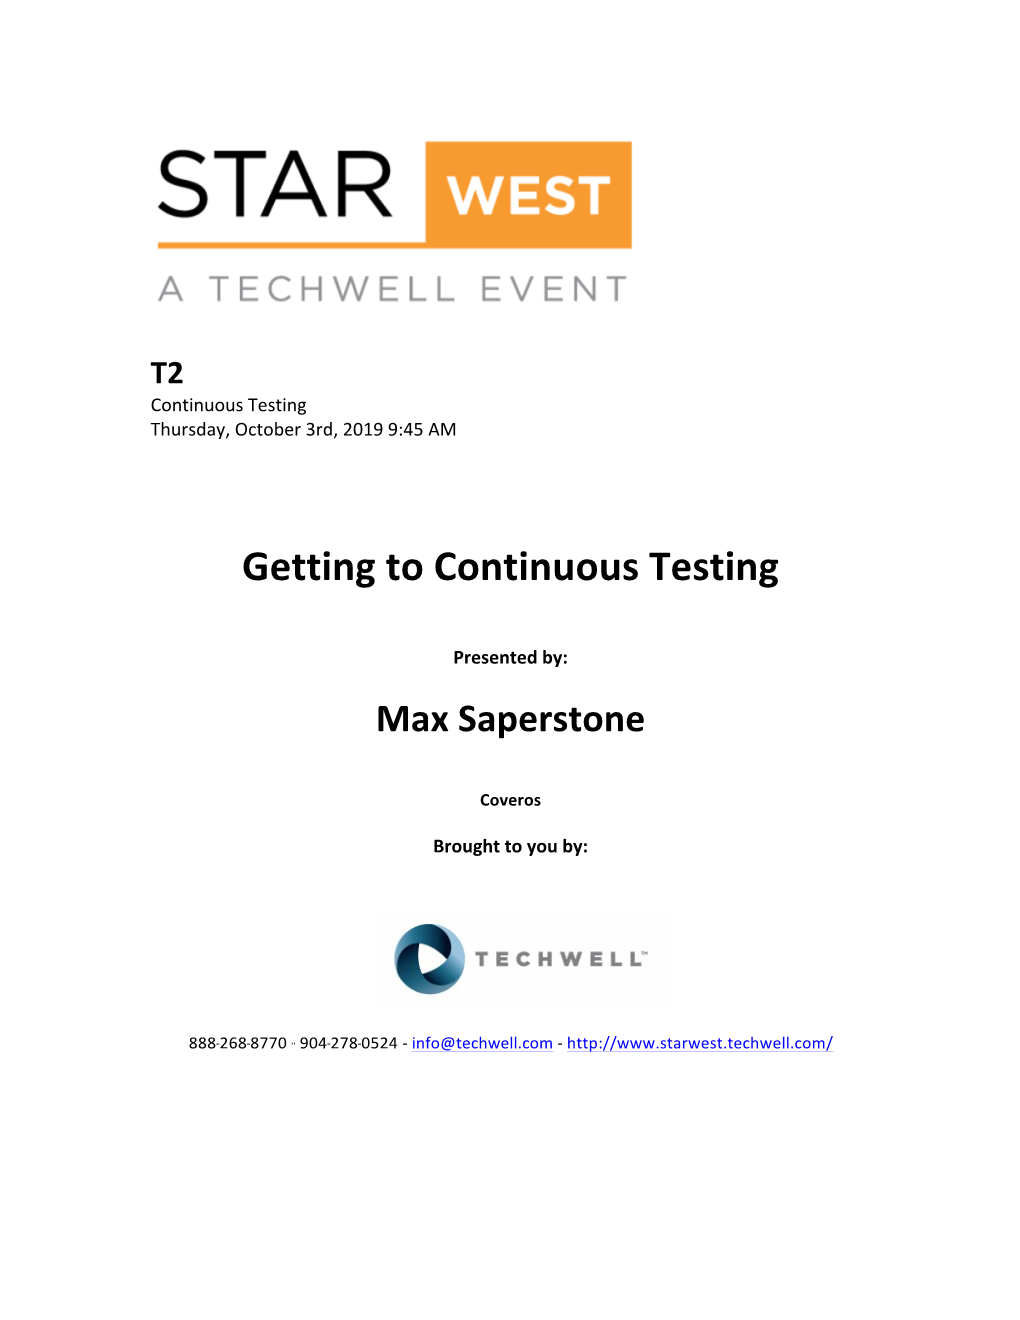 Getting to Continuous Testing